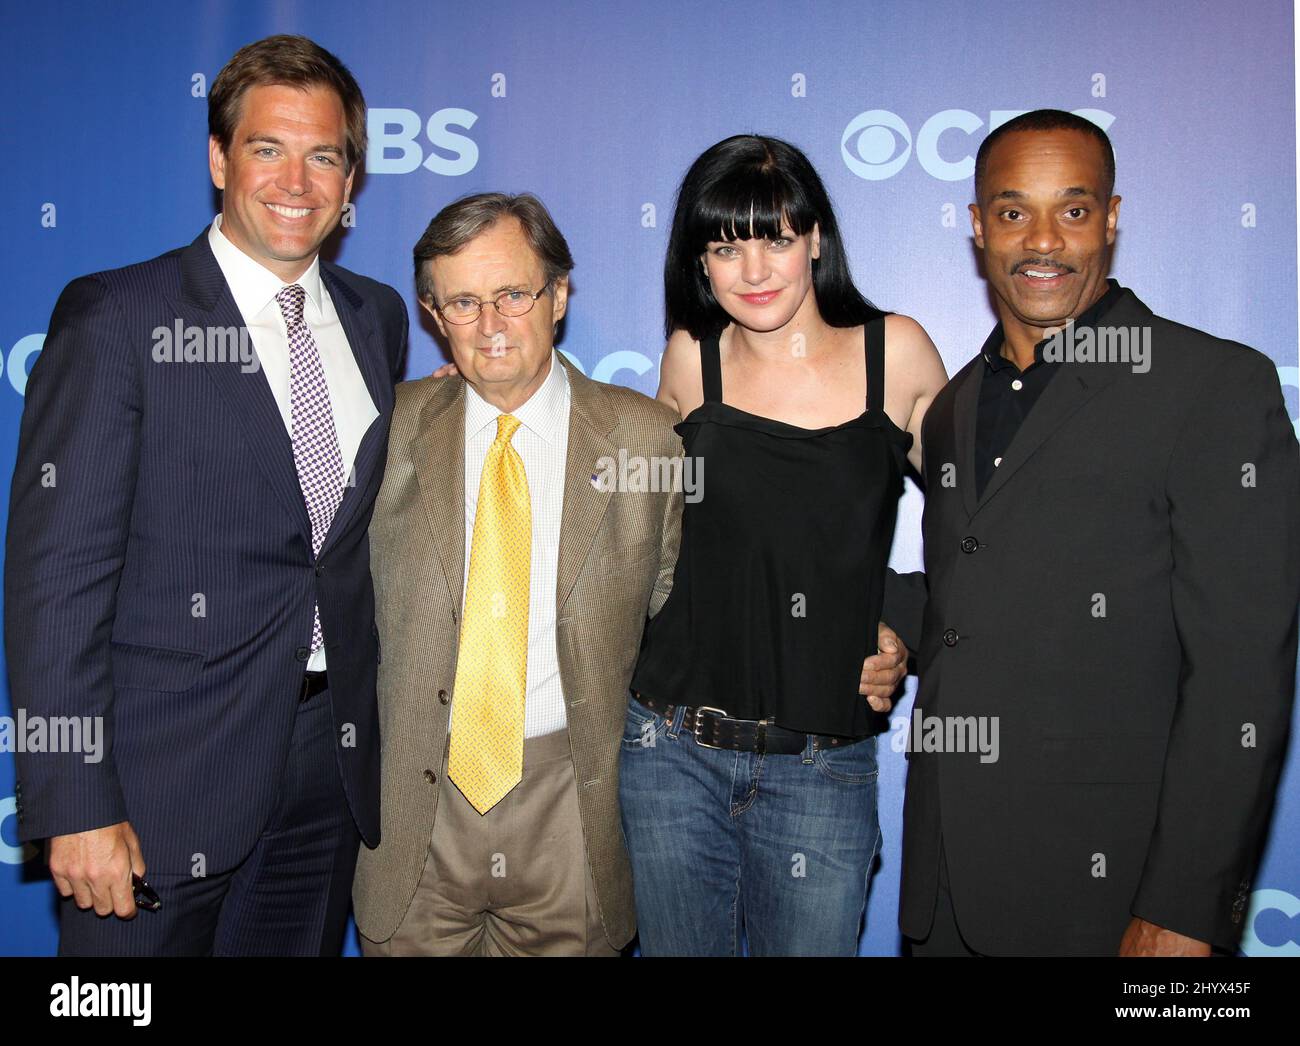 Michael Weatherly, David McCallum, Pauley Perrette and Rocky Carroll from 'NCIS' during CBS 2010 Upfronts held at Damrosch Park in Lincoln Center, New York Stock Photo